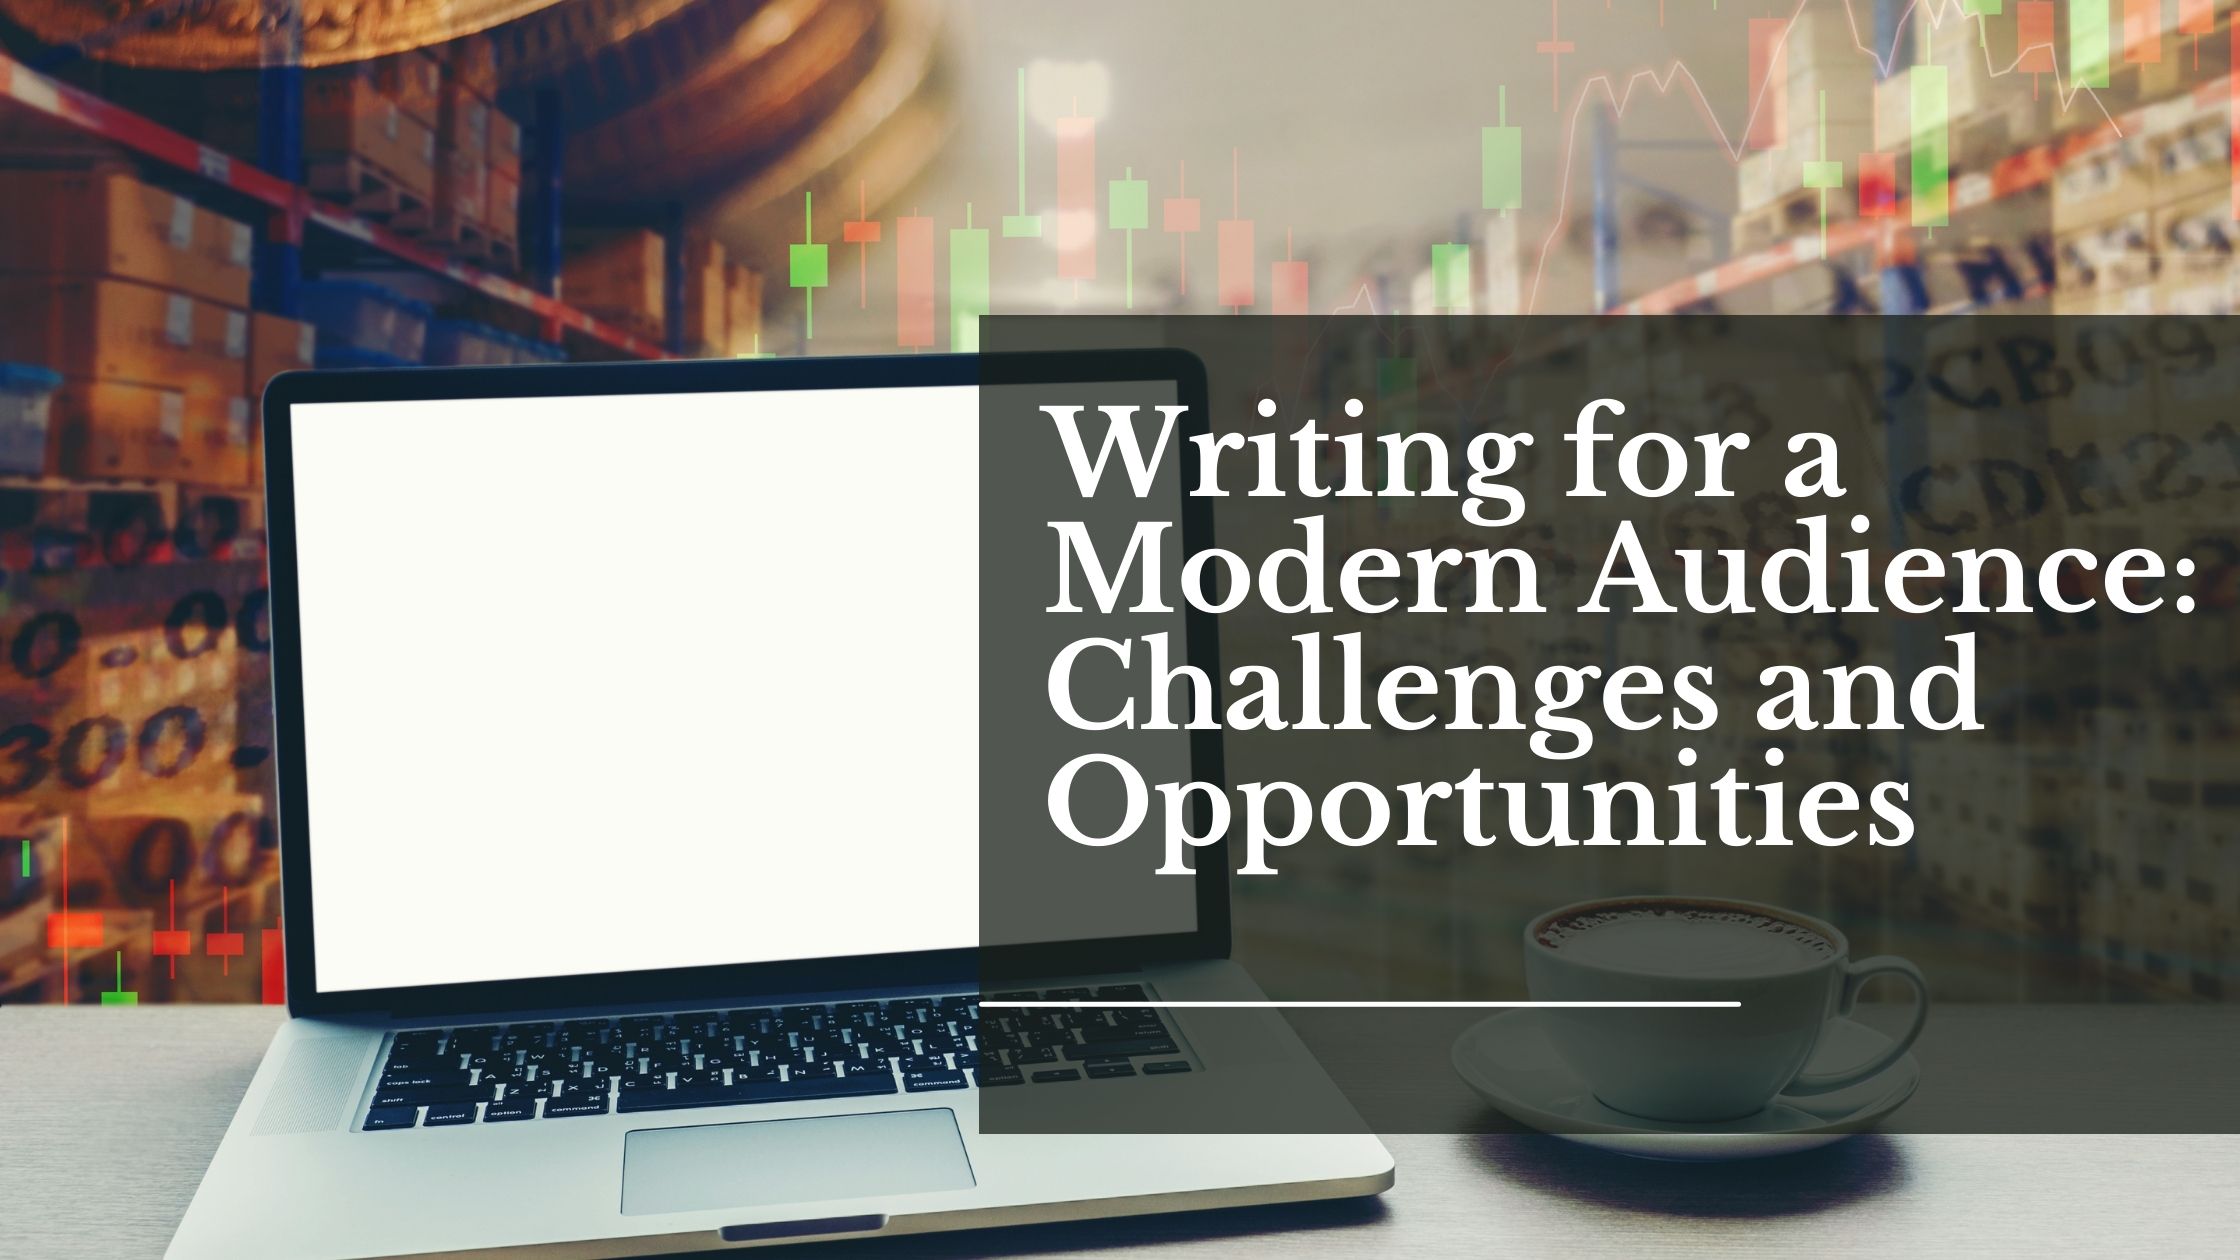 Writing for a Modern Audience: Challenges and Opportunities